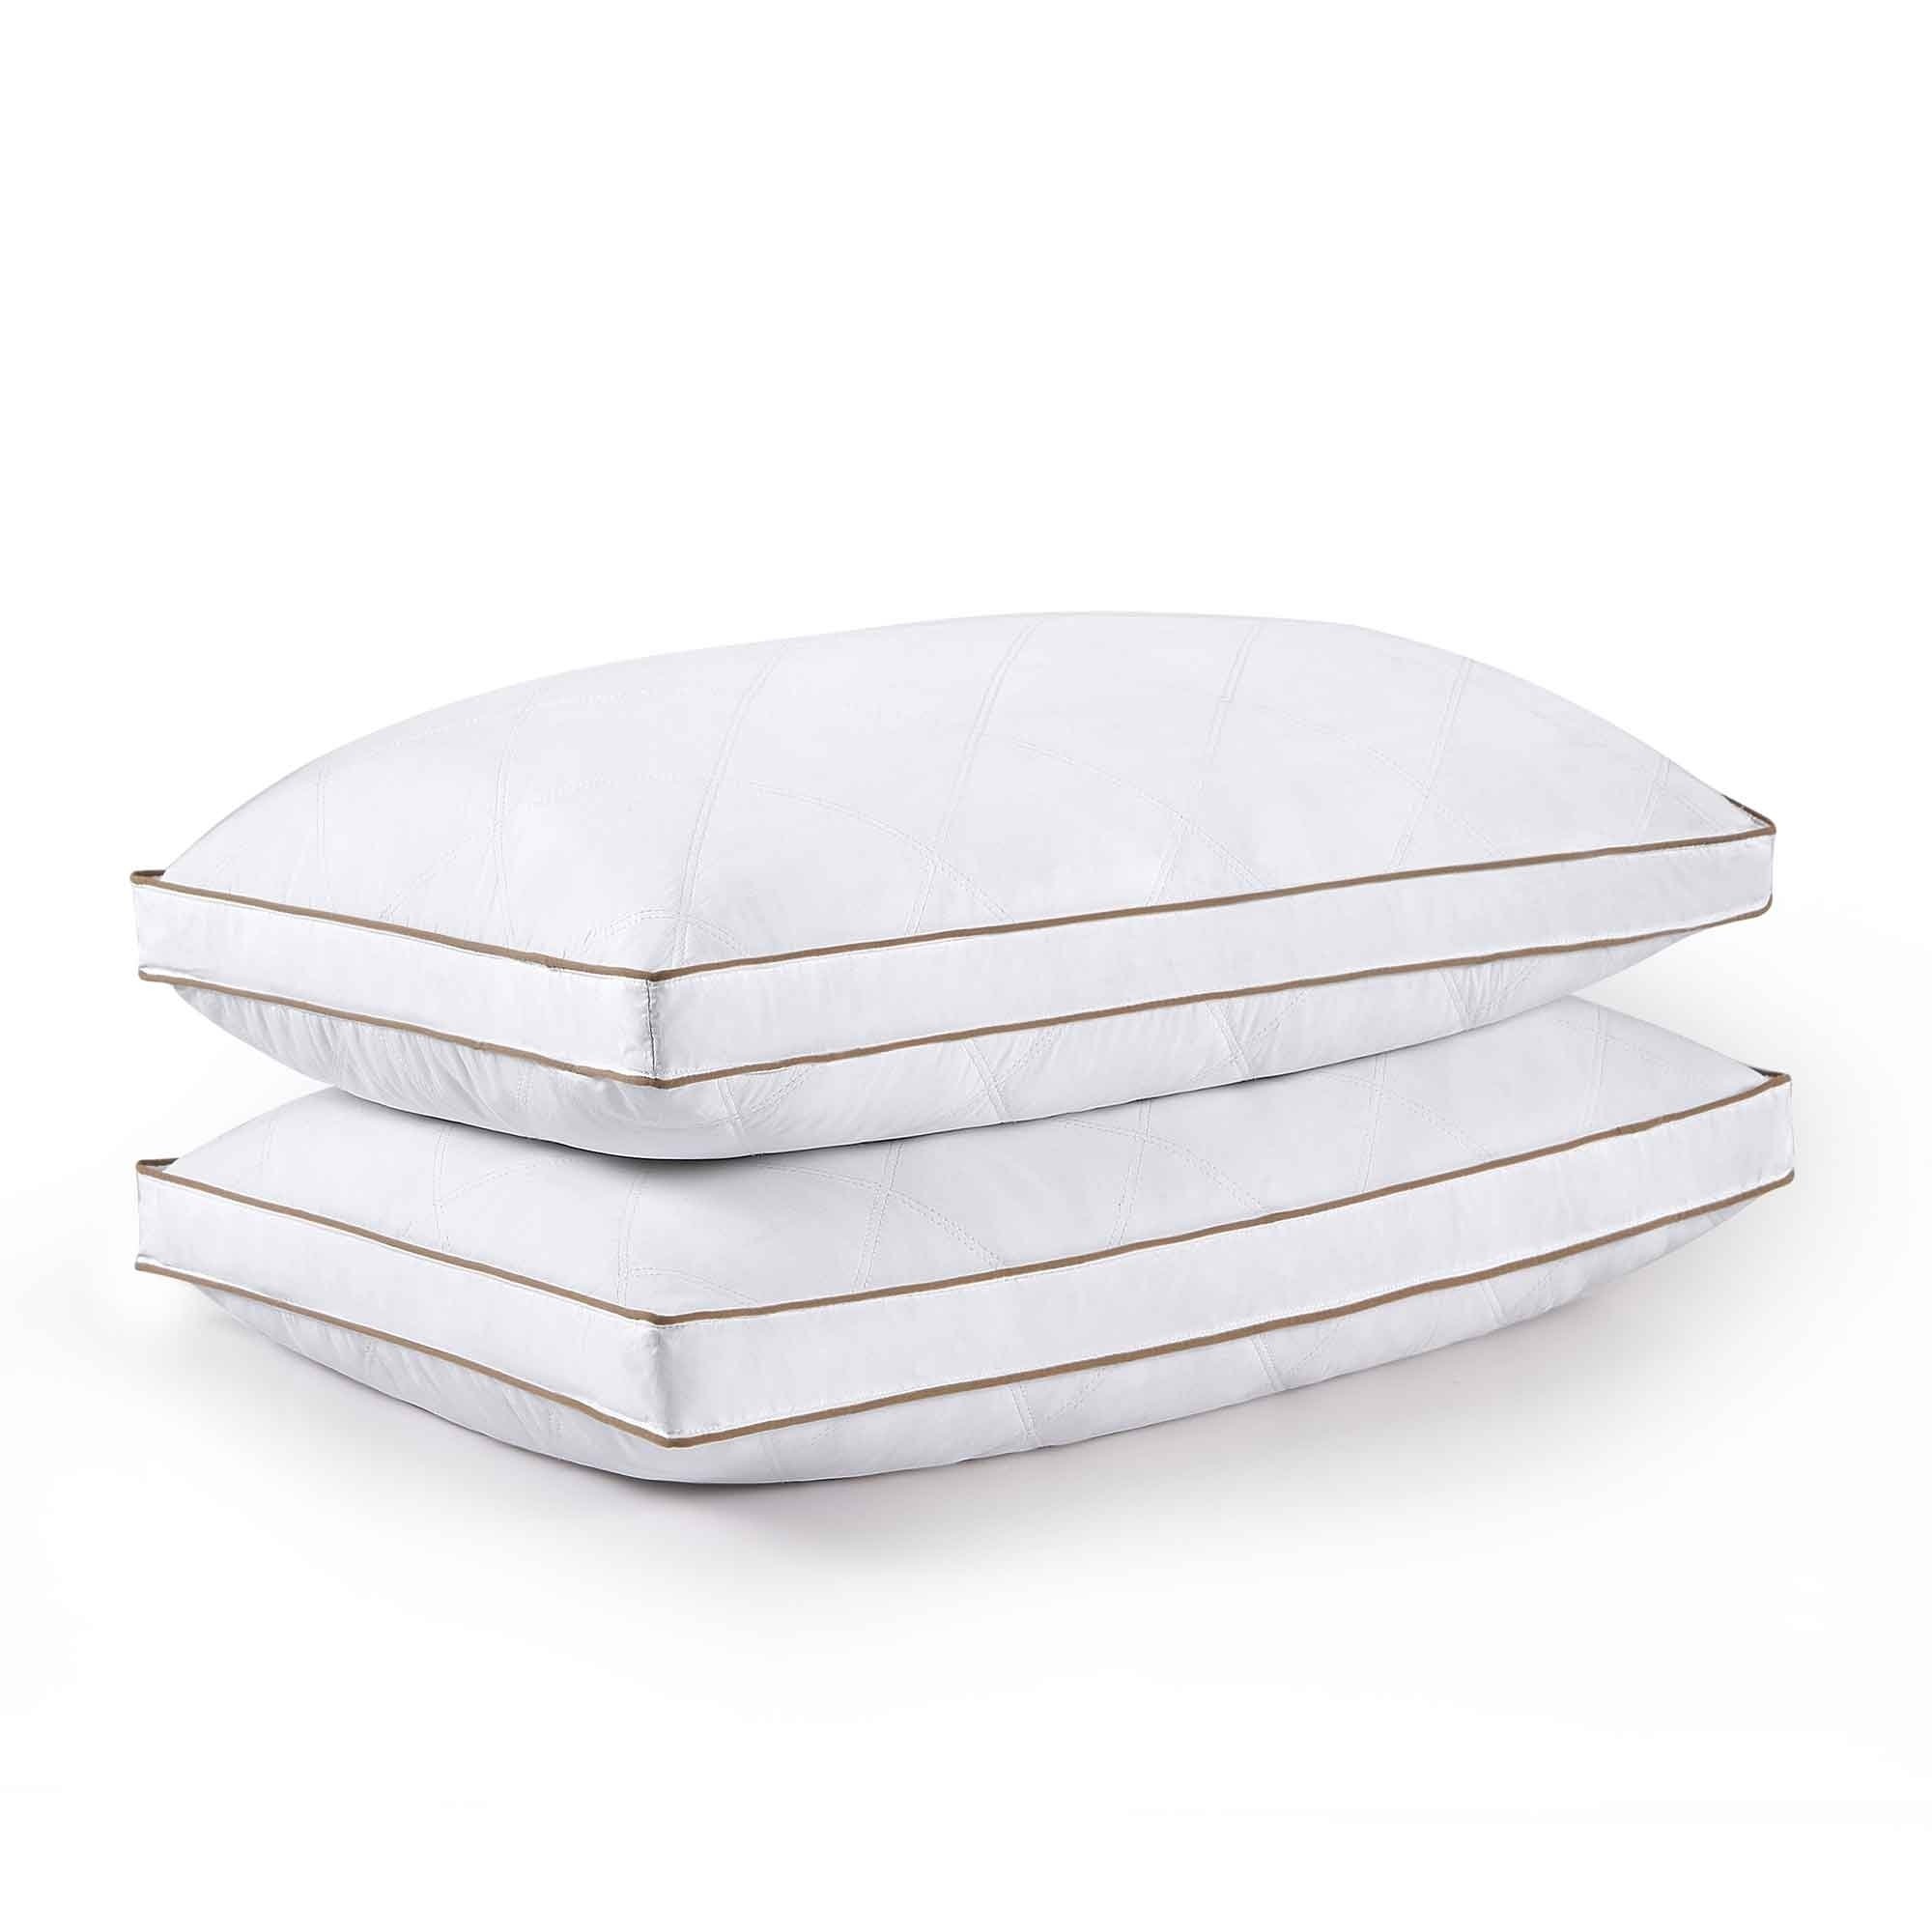 2 Pack Goose Feather Pillow Gusseted Pillow - Queen